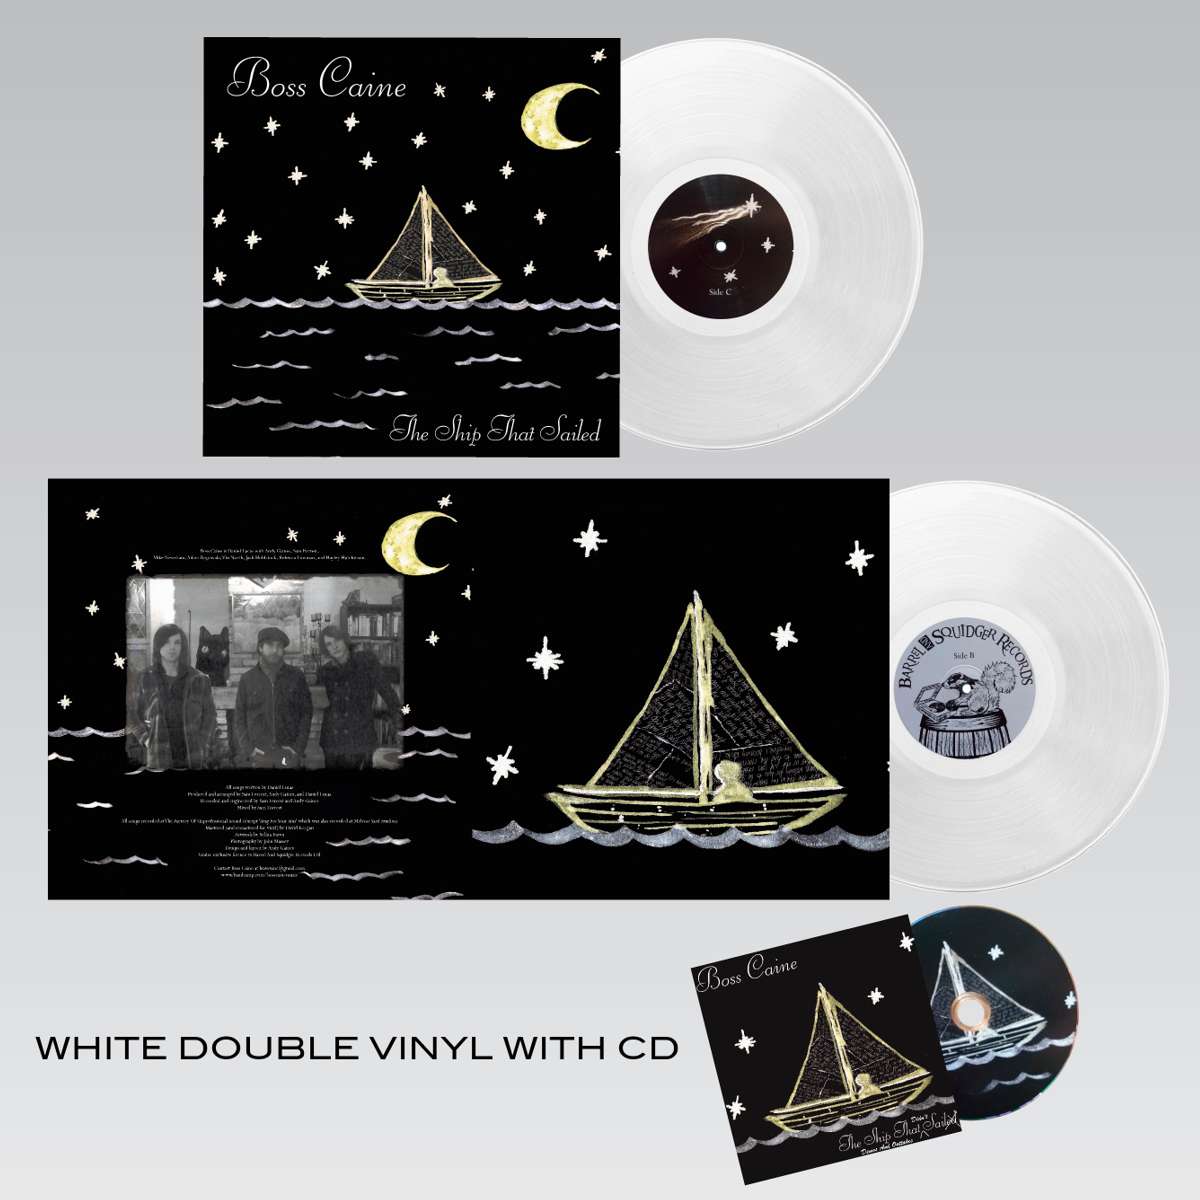 Boss Caine - The Ship That Sailed - Double White Vinyl LP + CD - Barrel And Squidger Records